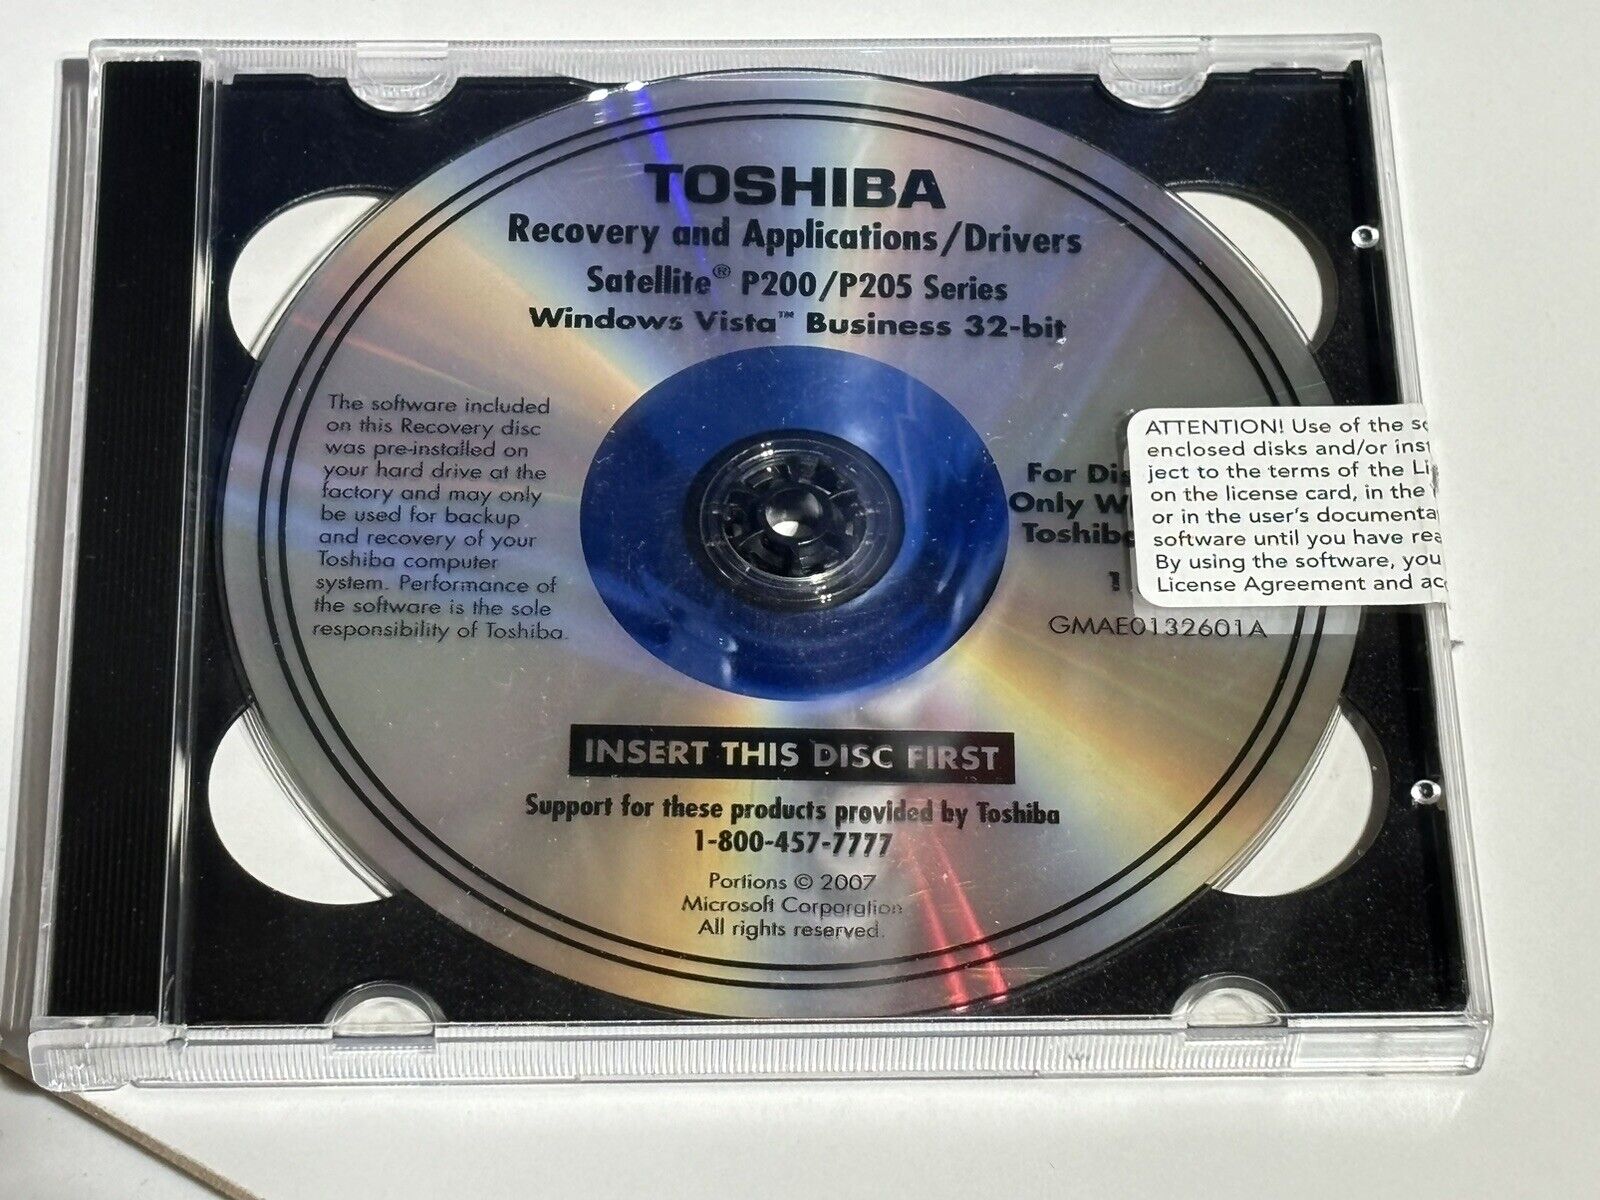 Toshiba Recovery and Applications Drivers DVD Satellite P/200 / P205